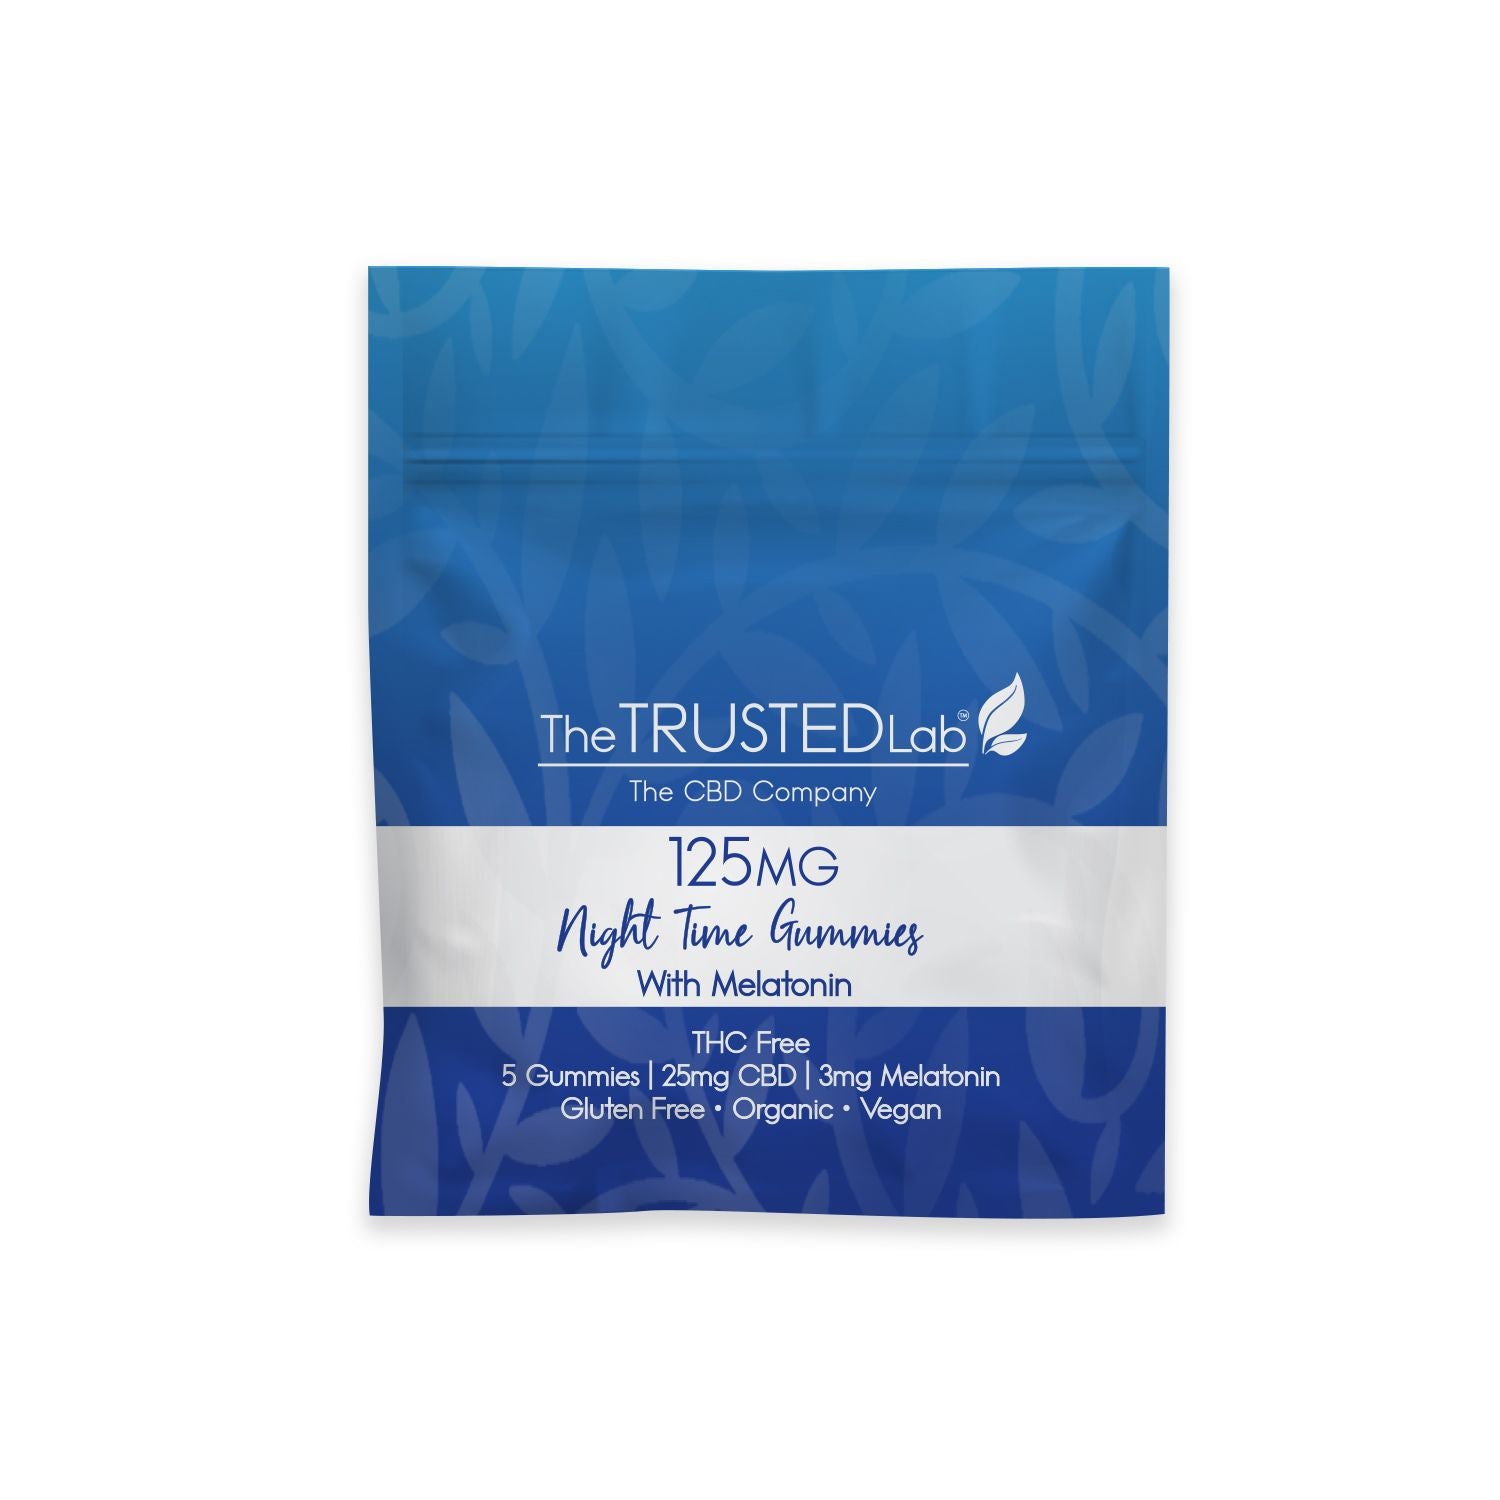 The Trusted Lab Gummy Travel Single Packs (5 count) Best Price